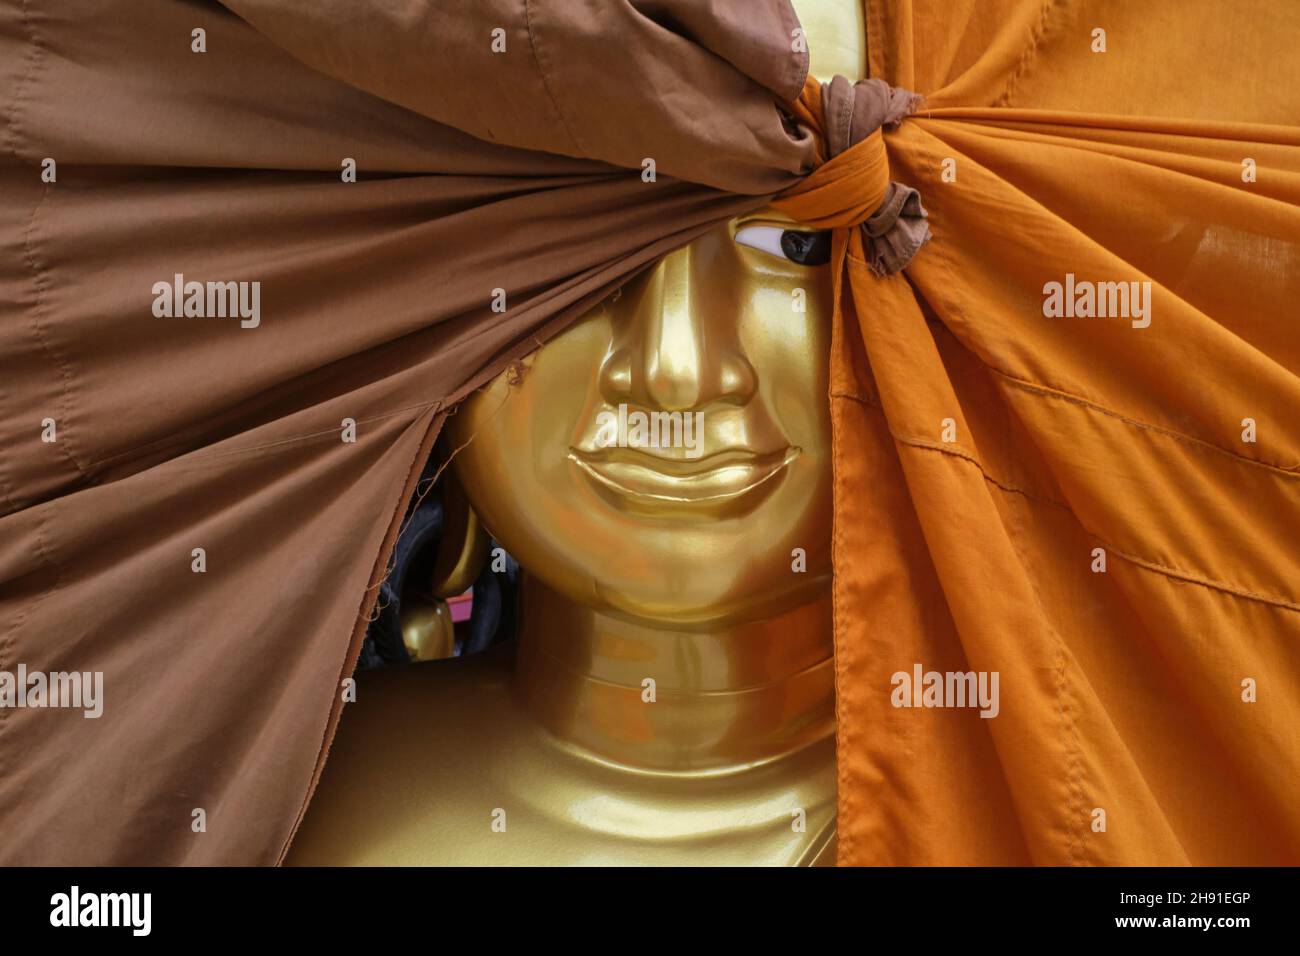 Buddha statue at a factory for Buddhist objects in Bamrung Muang Rd., Bangkok, Thailand, one eye peering out from behind an orange & brown cloth cover Stock Photo